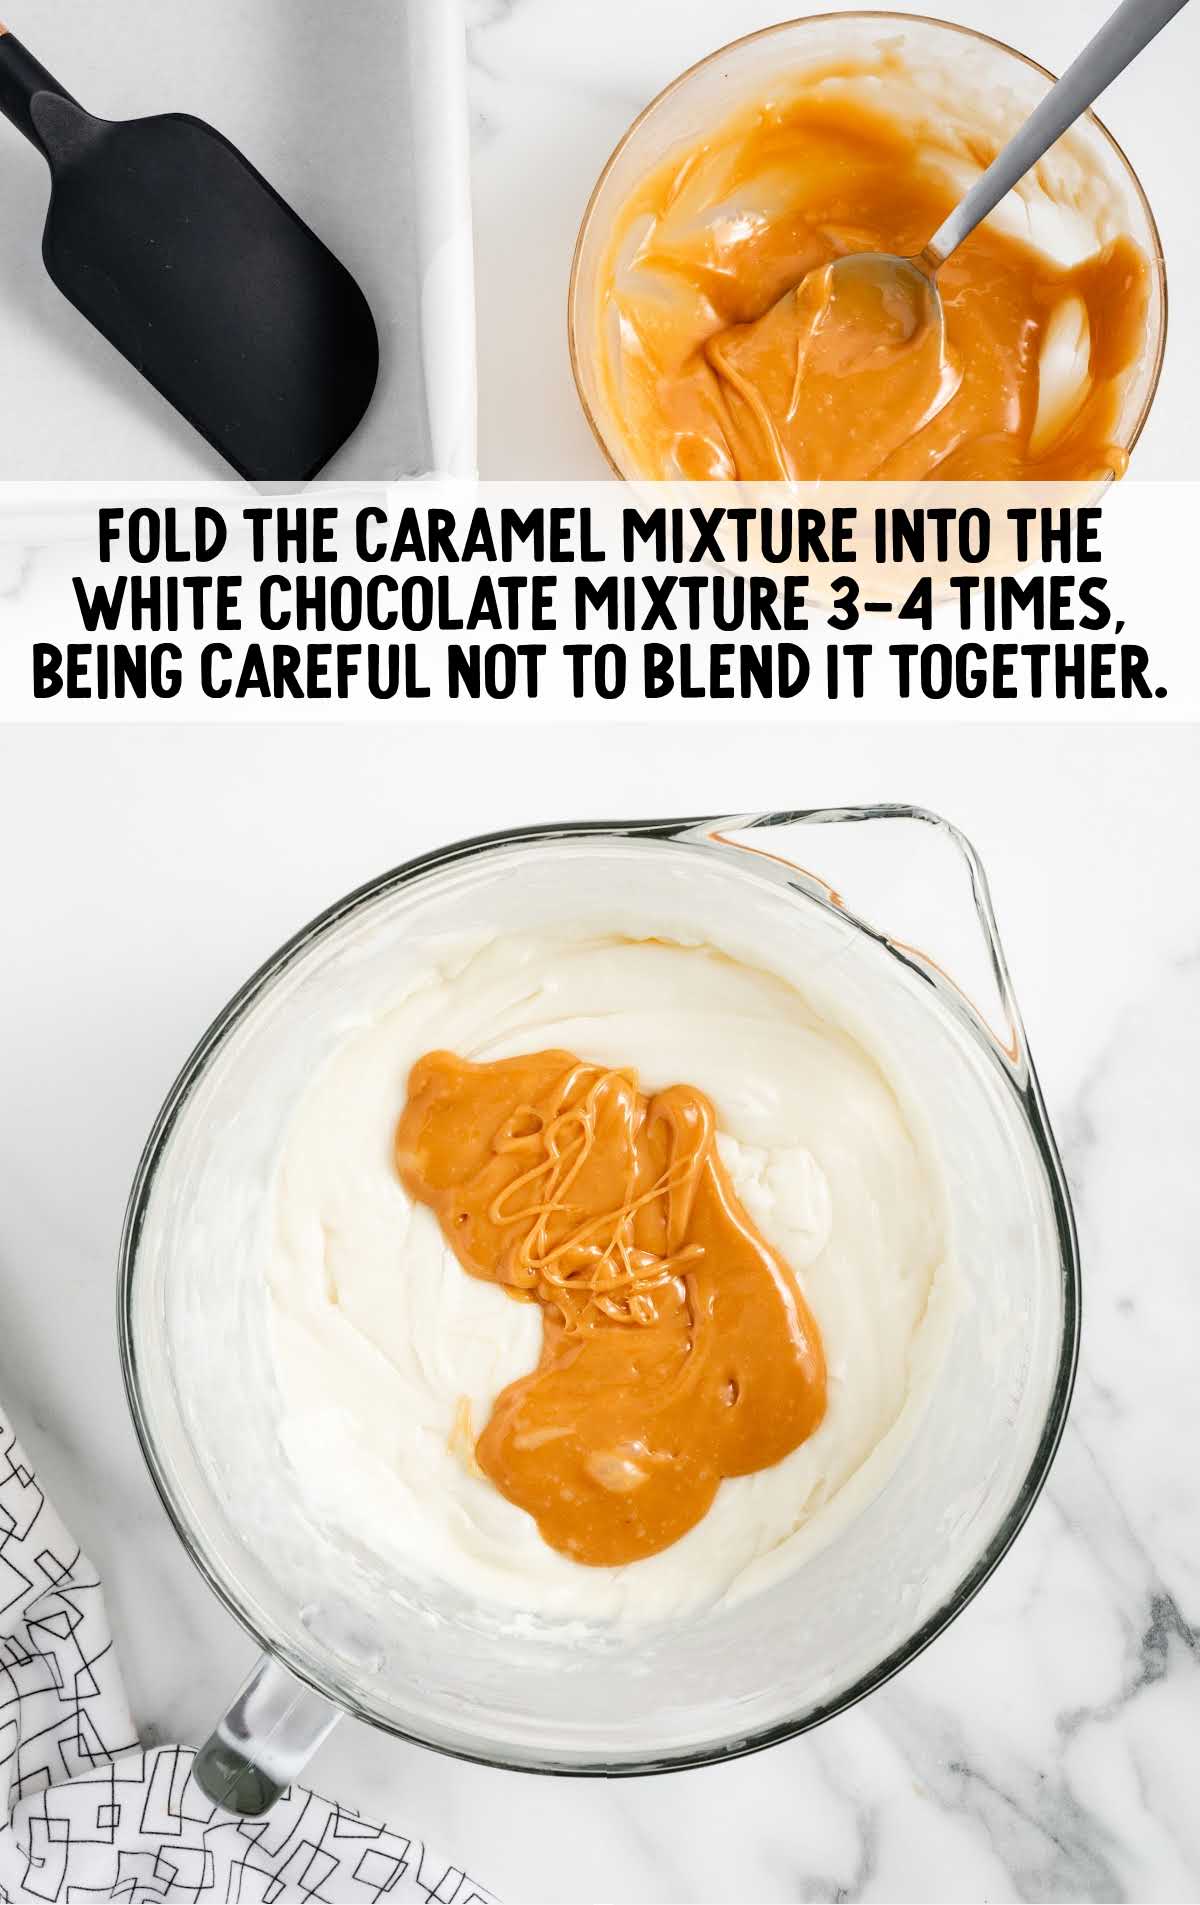 caramel mixture folded into the white chocolate mixture in a bowl